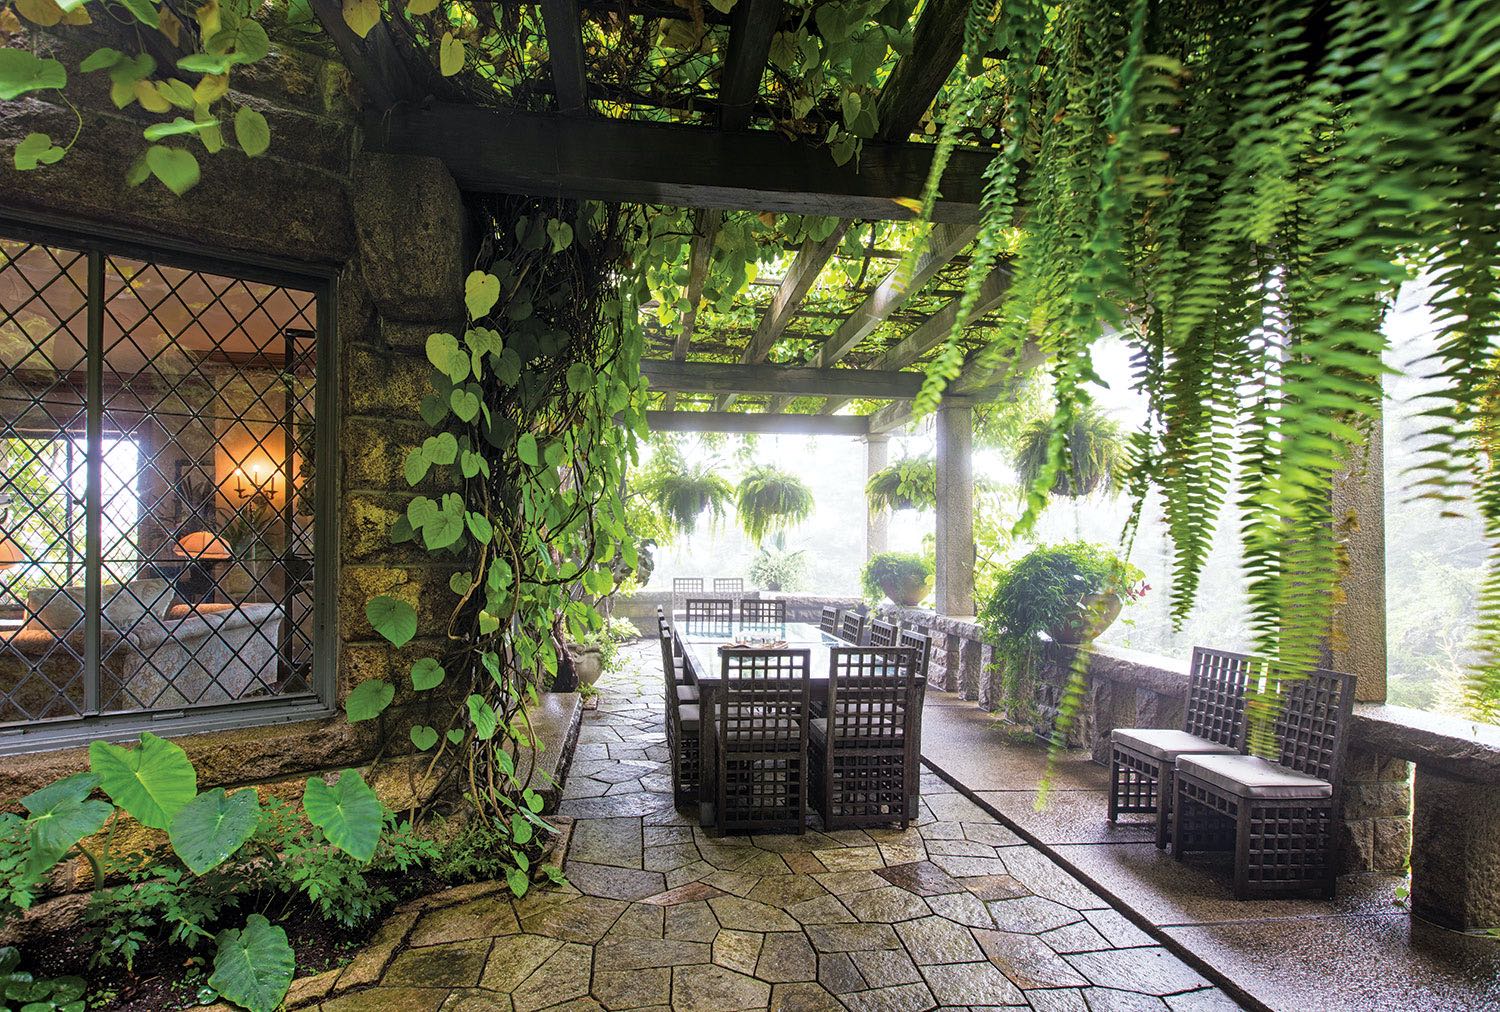 Shaded, stone-floored dining terrace surrounded by ferns and vine-covered walls at Skylands, Martha Stewart's summer home in Maine. 